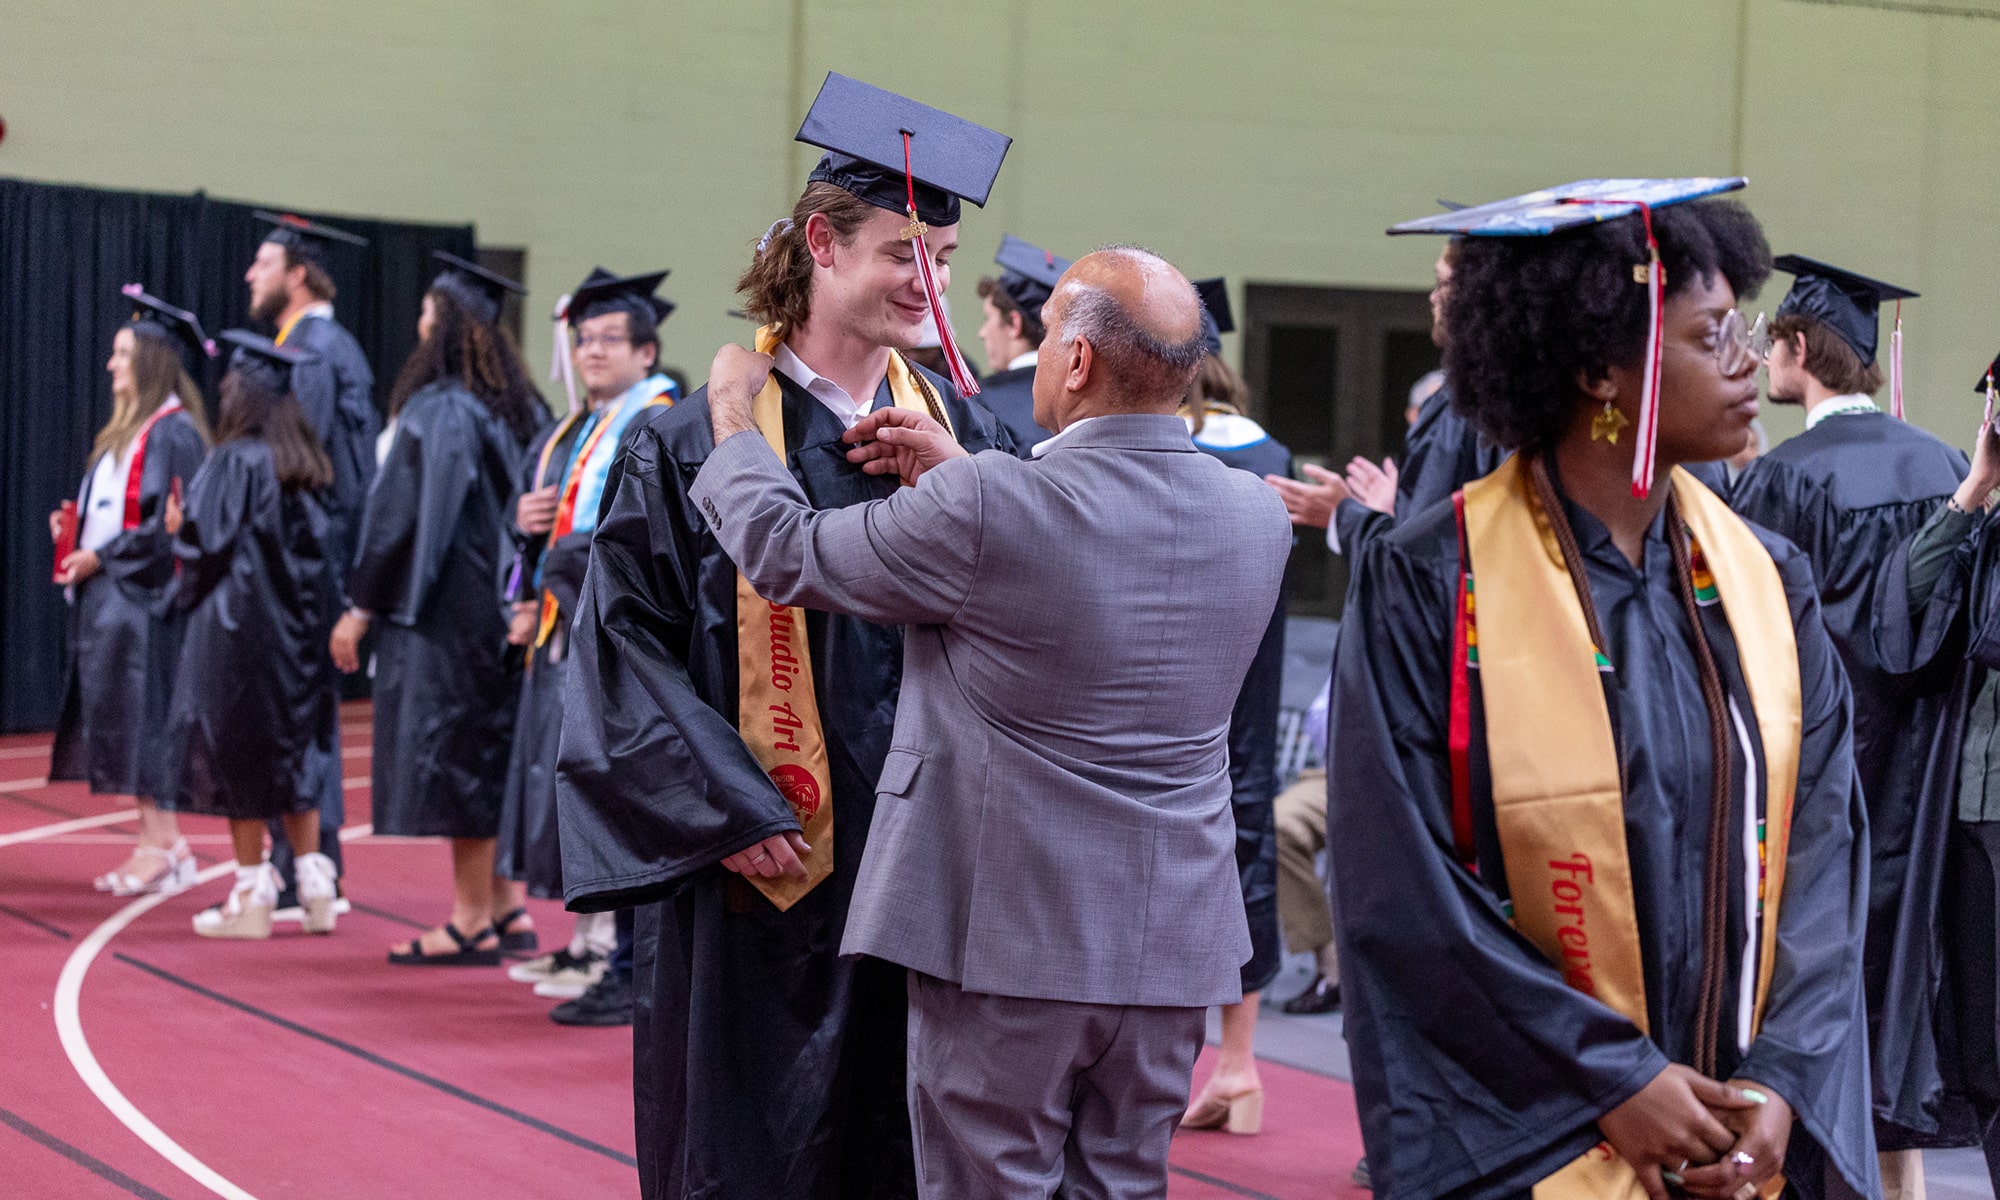 Raj Bellani fixing a graduates' stole before going on stage